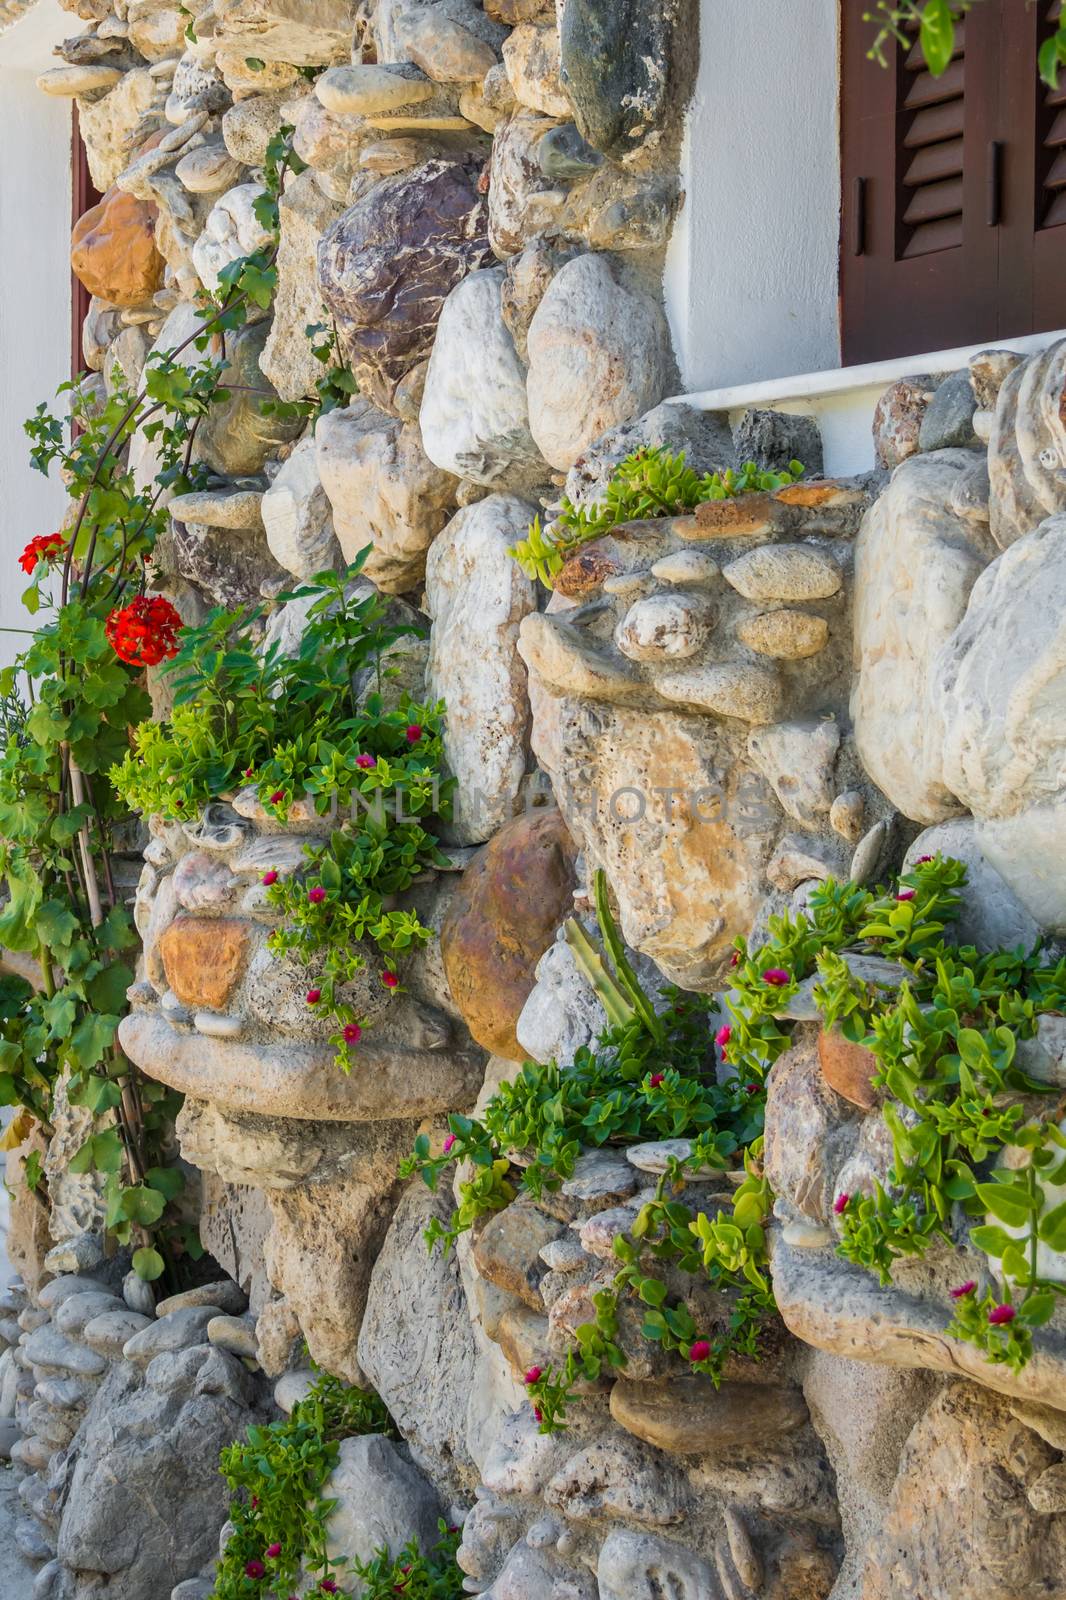 Old natural stone wall with plants growing on it